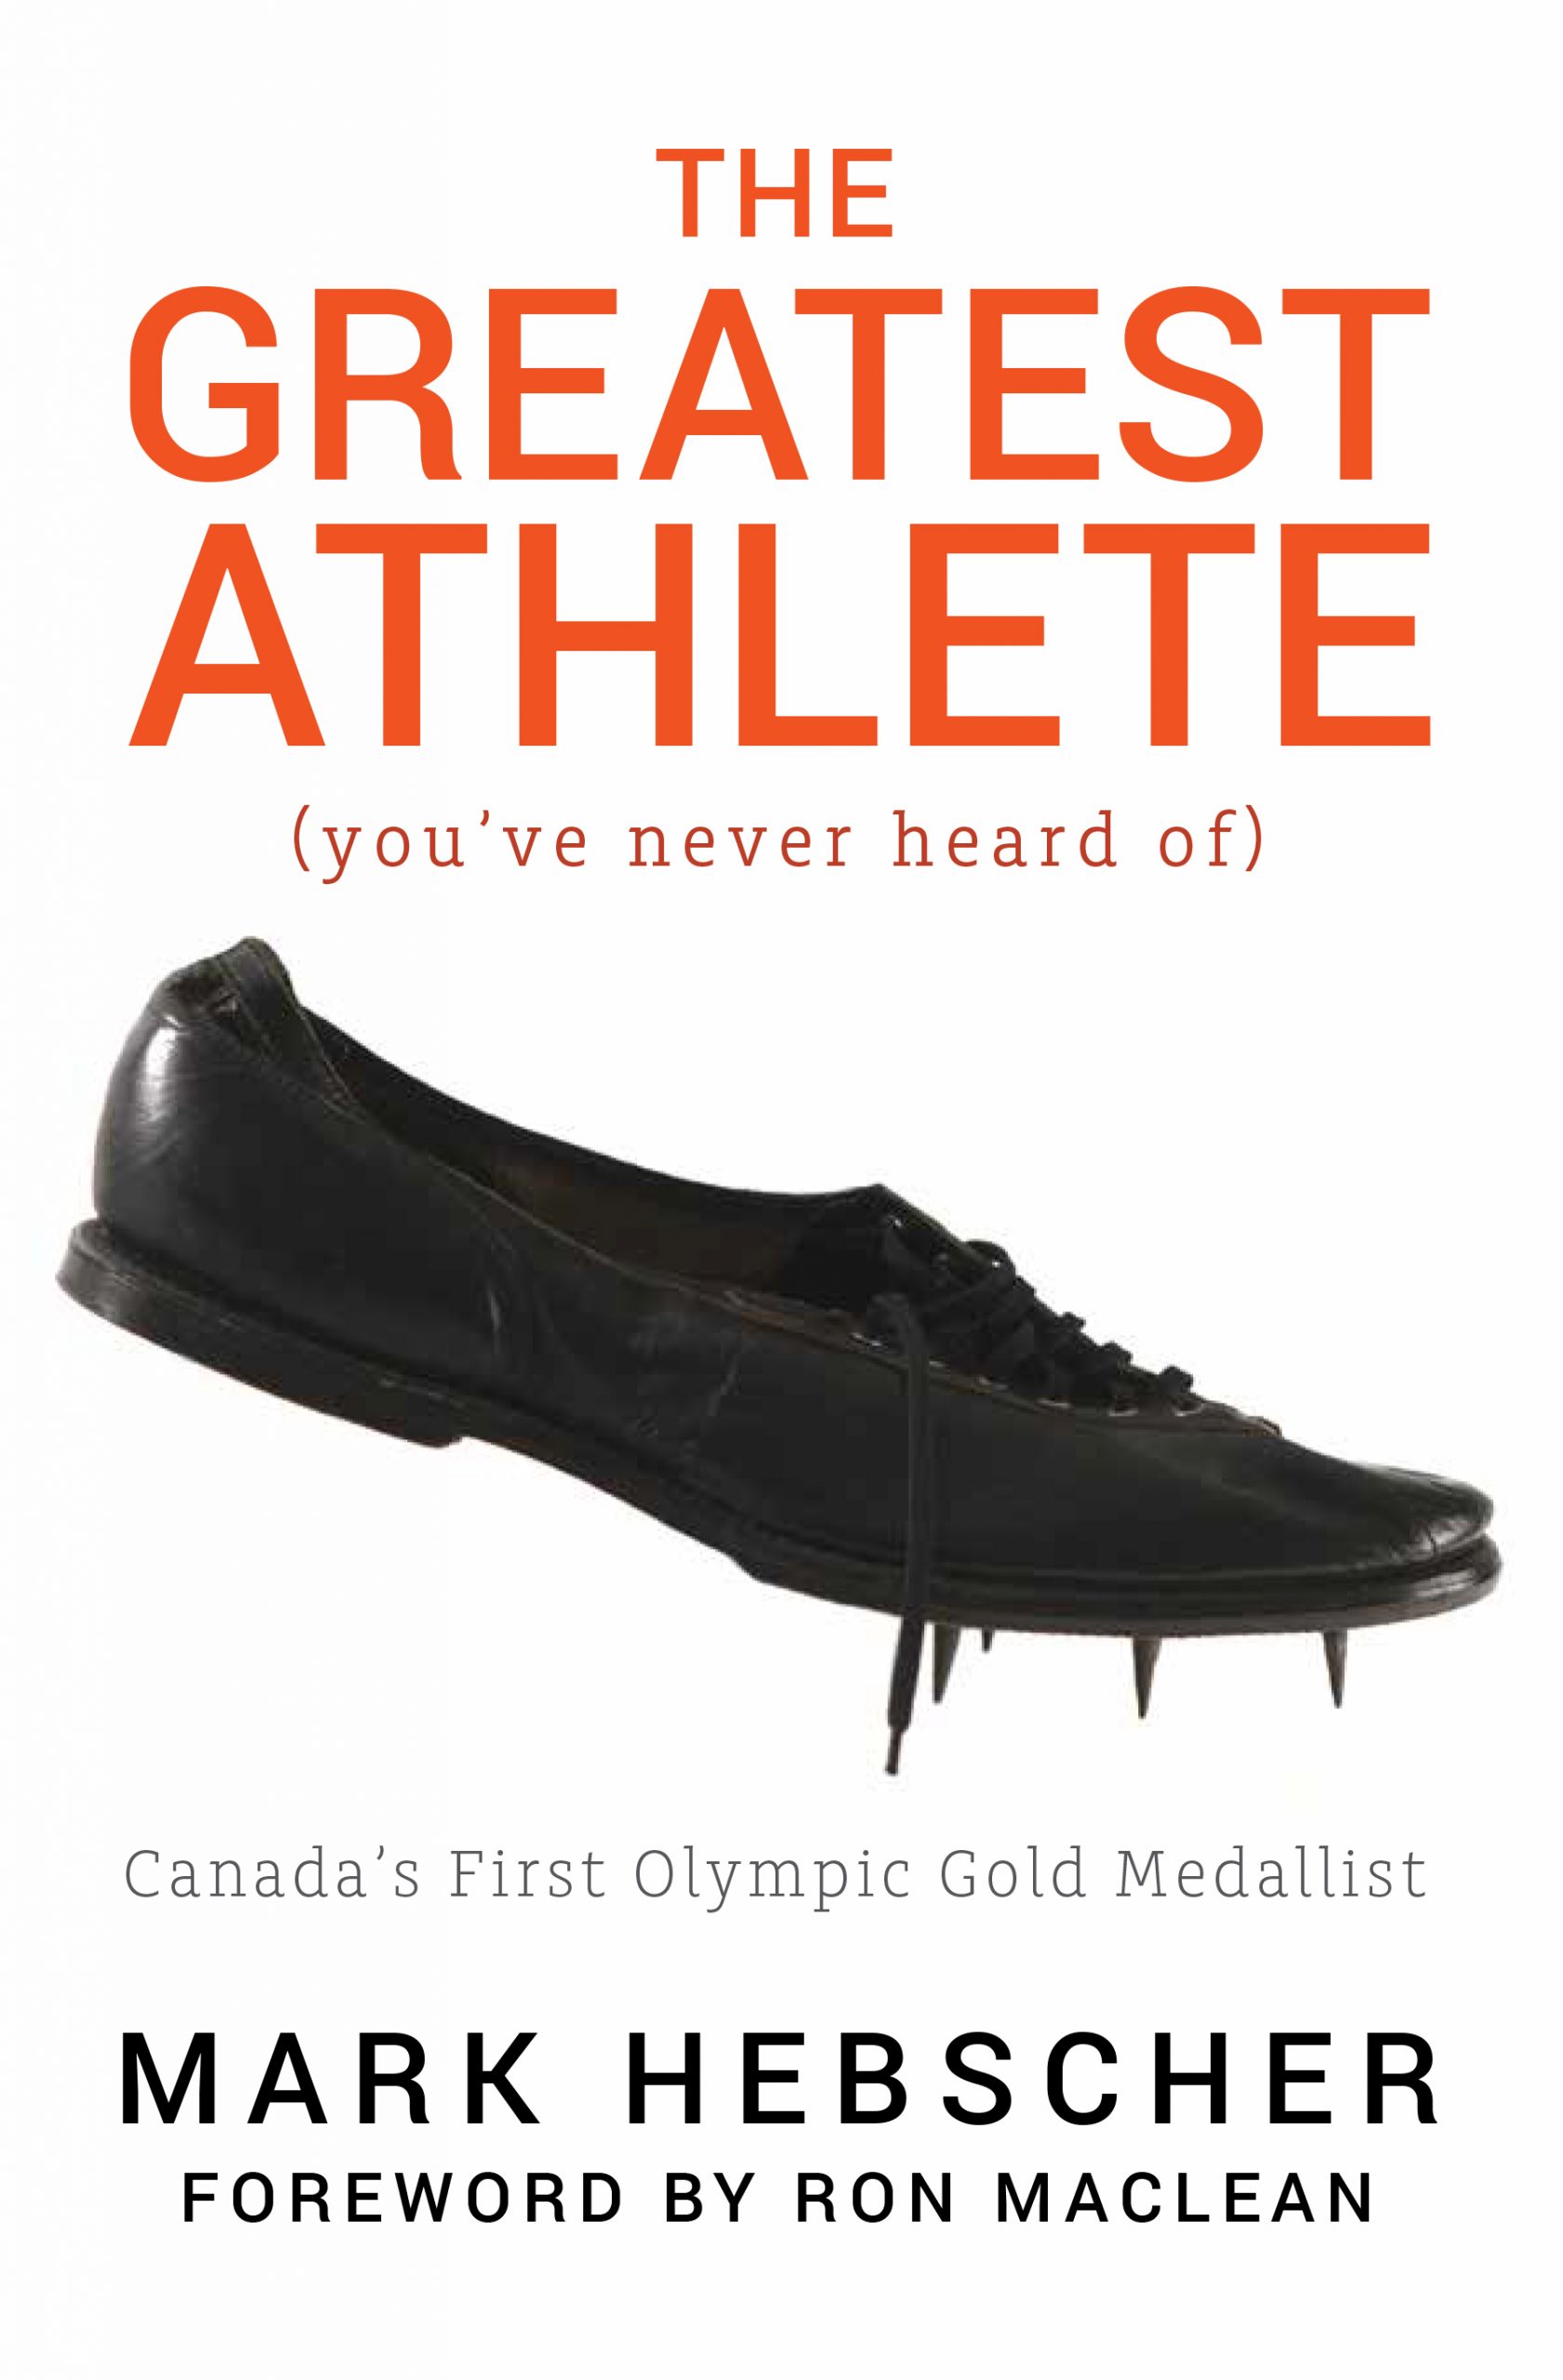 Cover for The Greatest Athlete (you’ve never heard of) – Canada’s First Olympic Gold Medallist